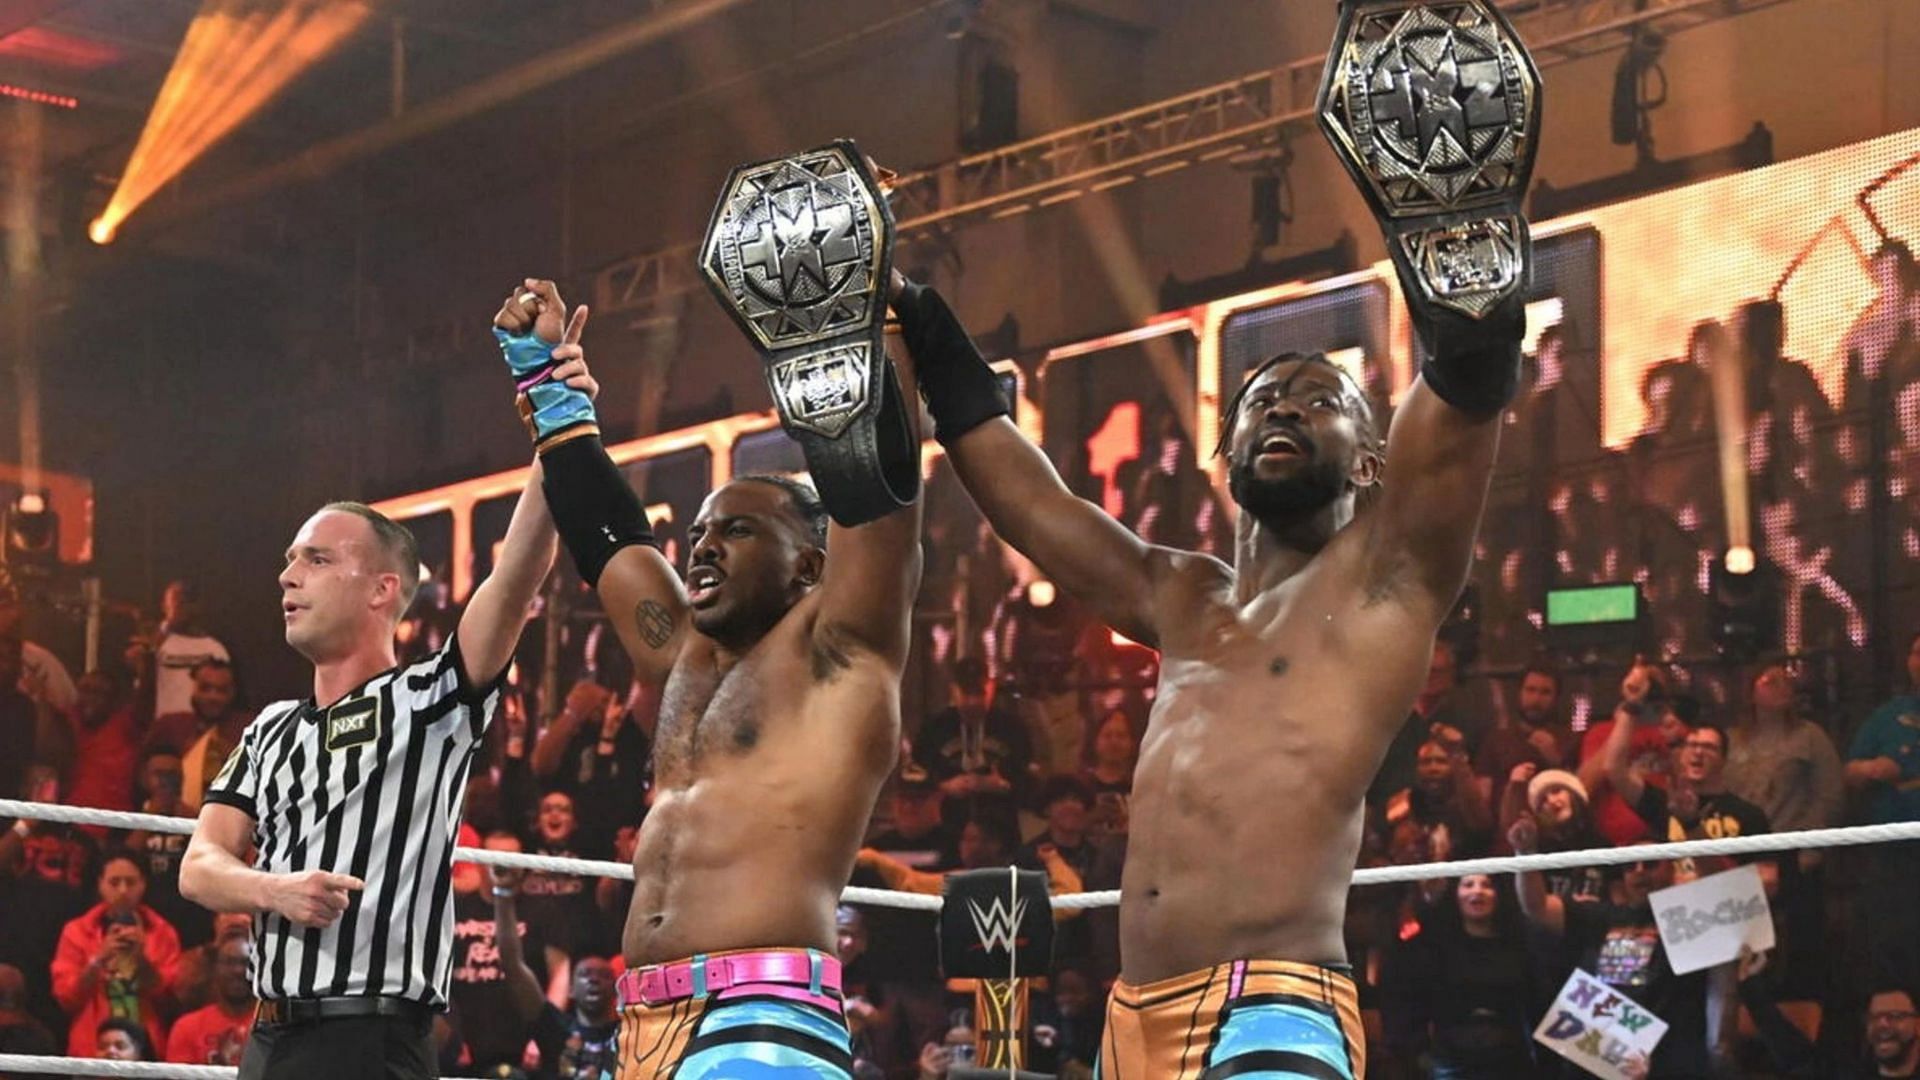 NXT Tag Team Champions The New Day